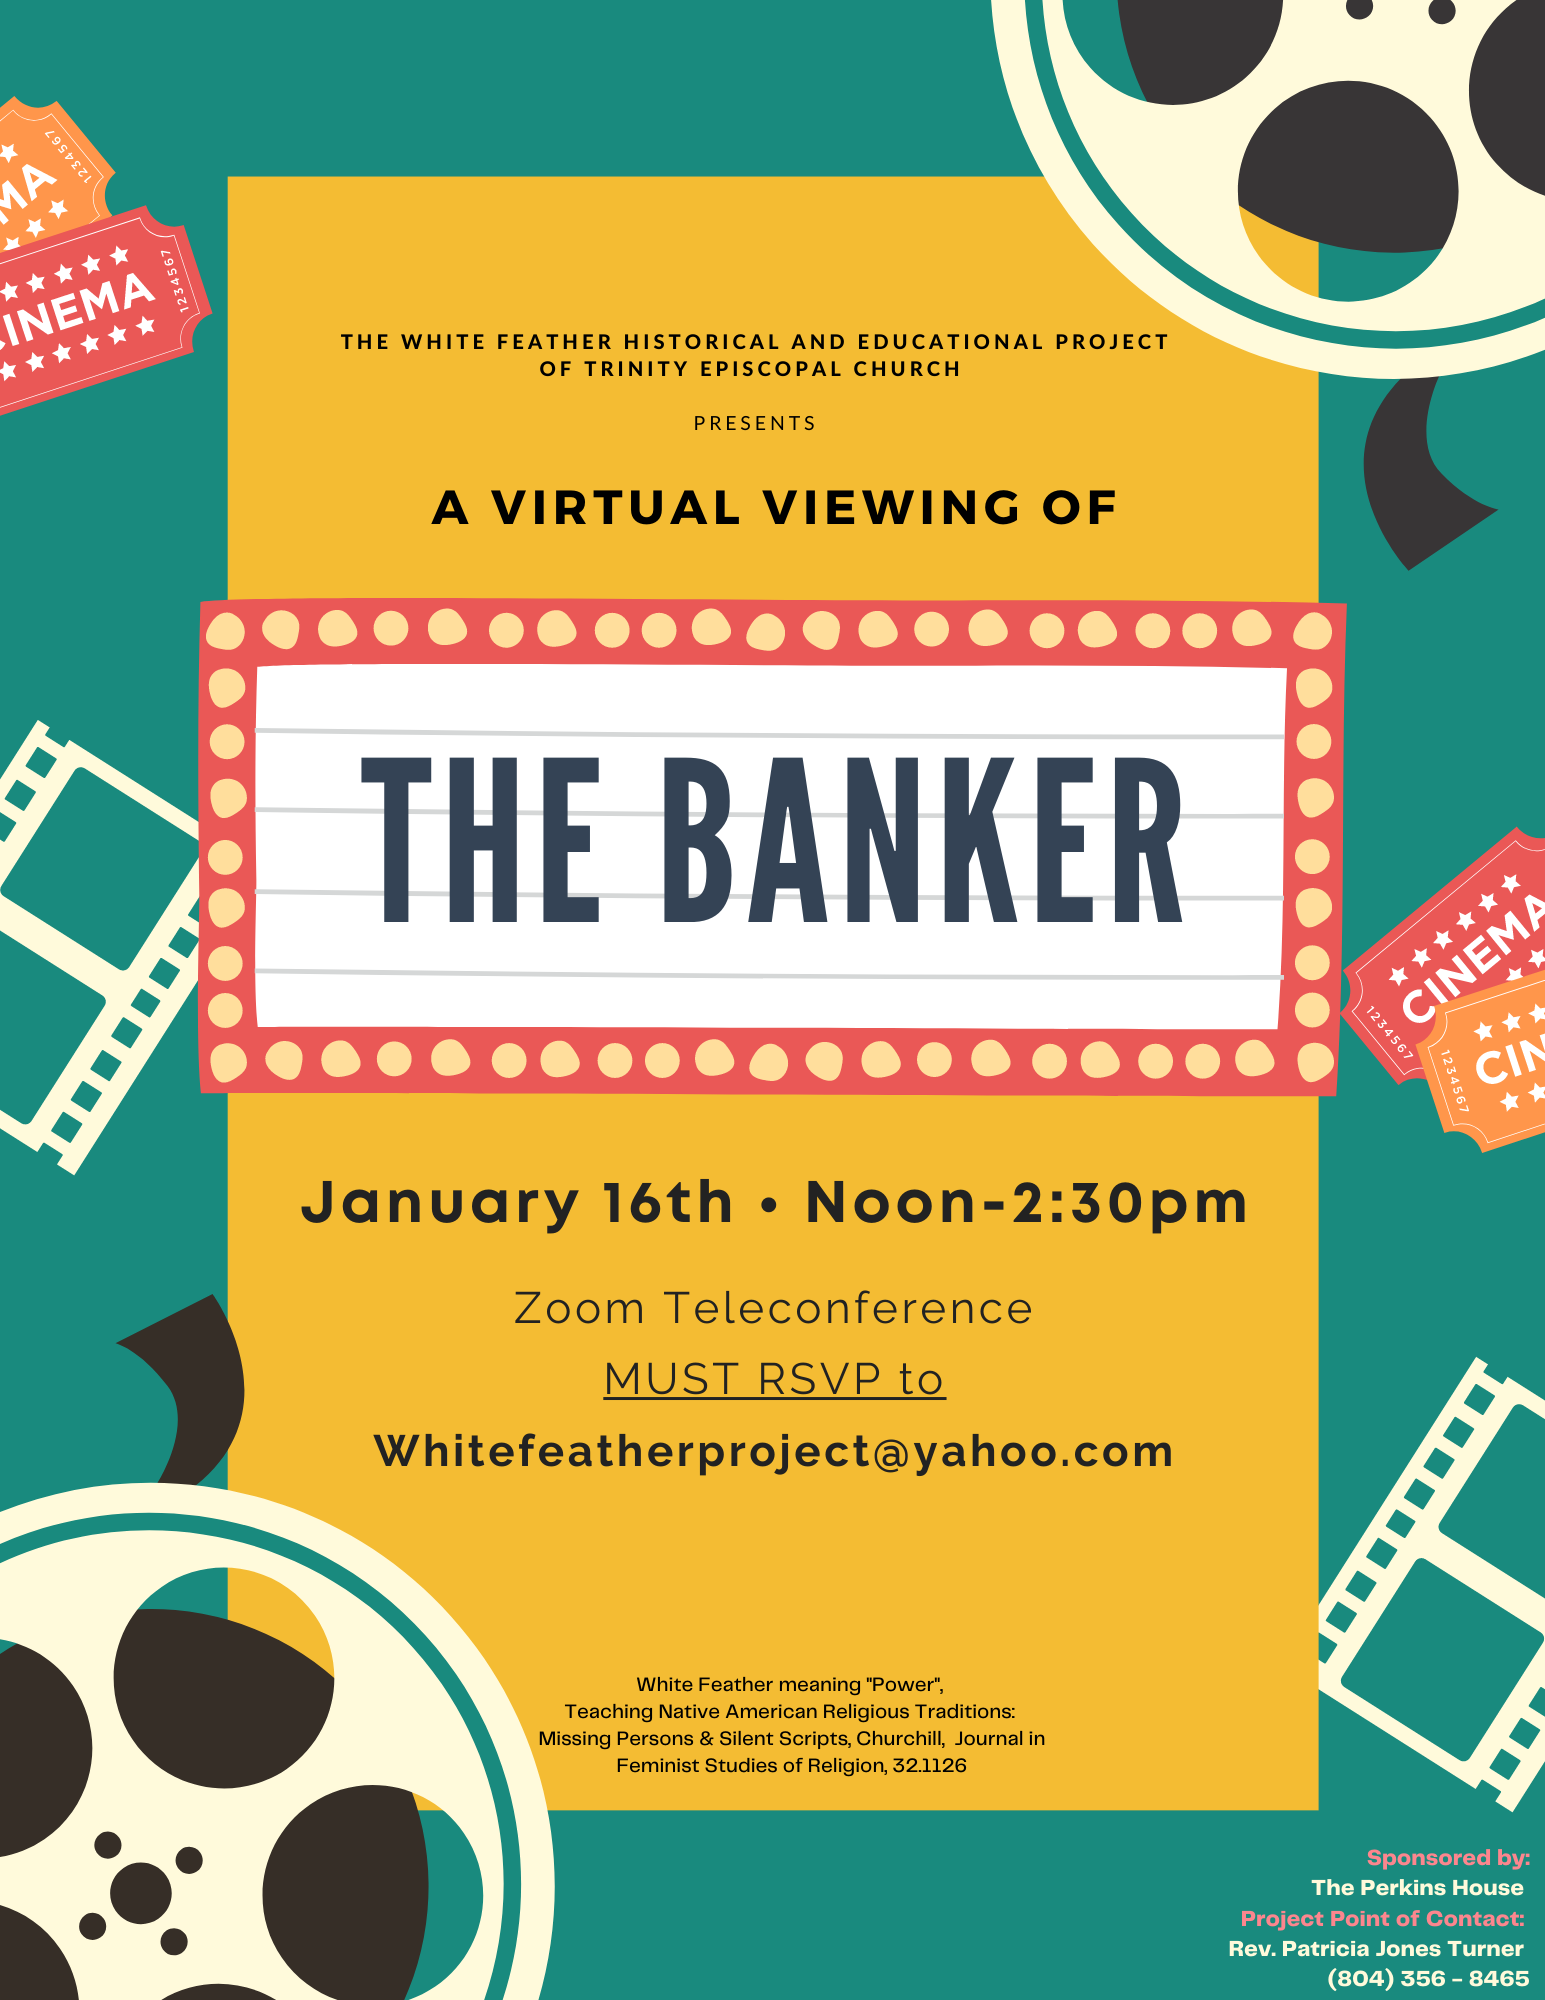 Viewing+of+the+banker.png